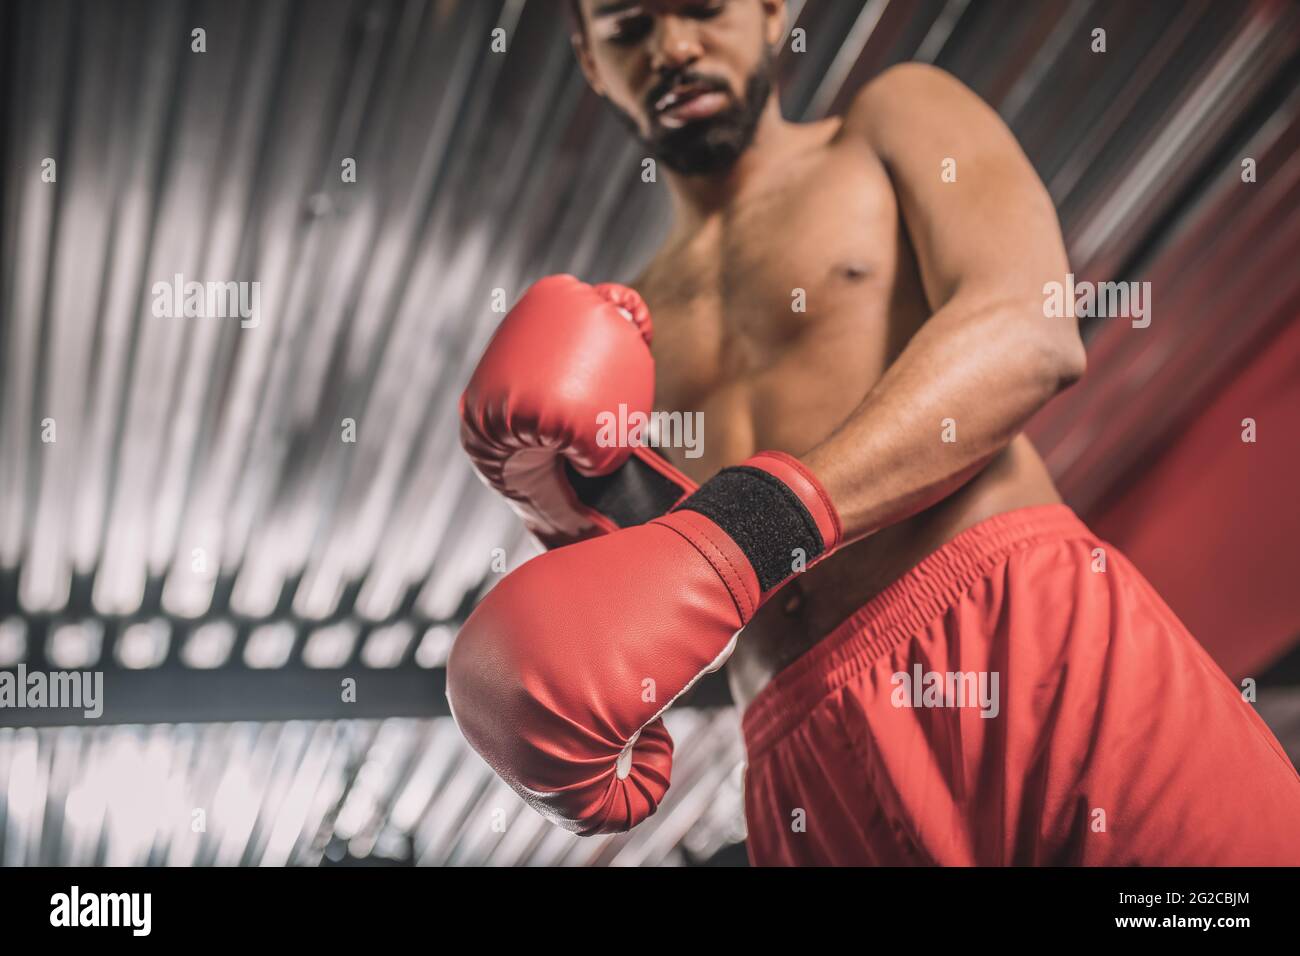 Dark-skinned kickboxer in red shorts and red boxing gloves Stock Photo